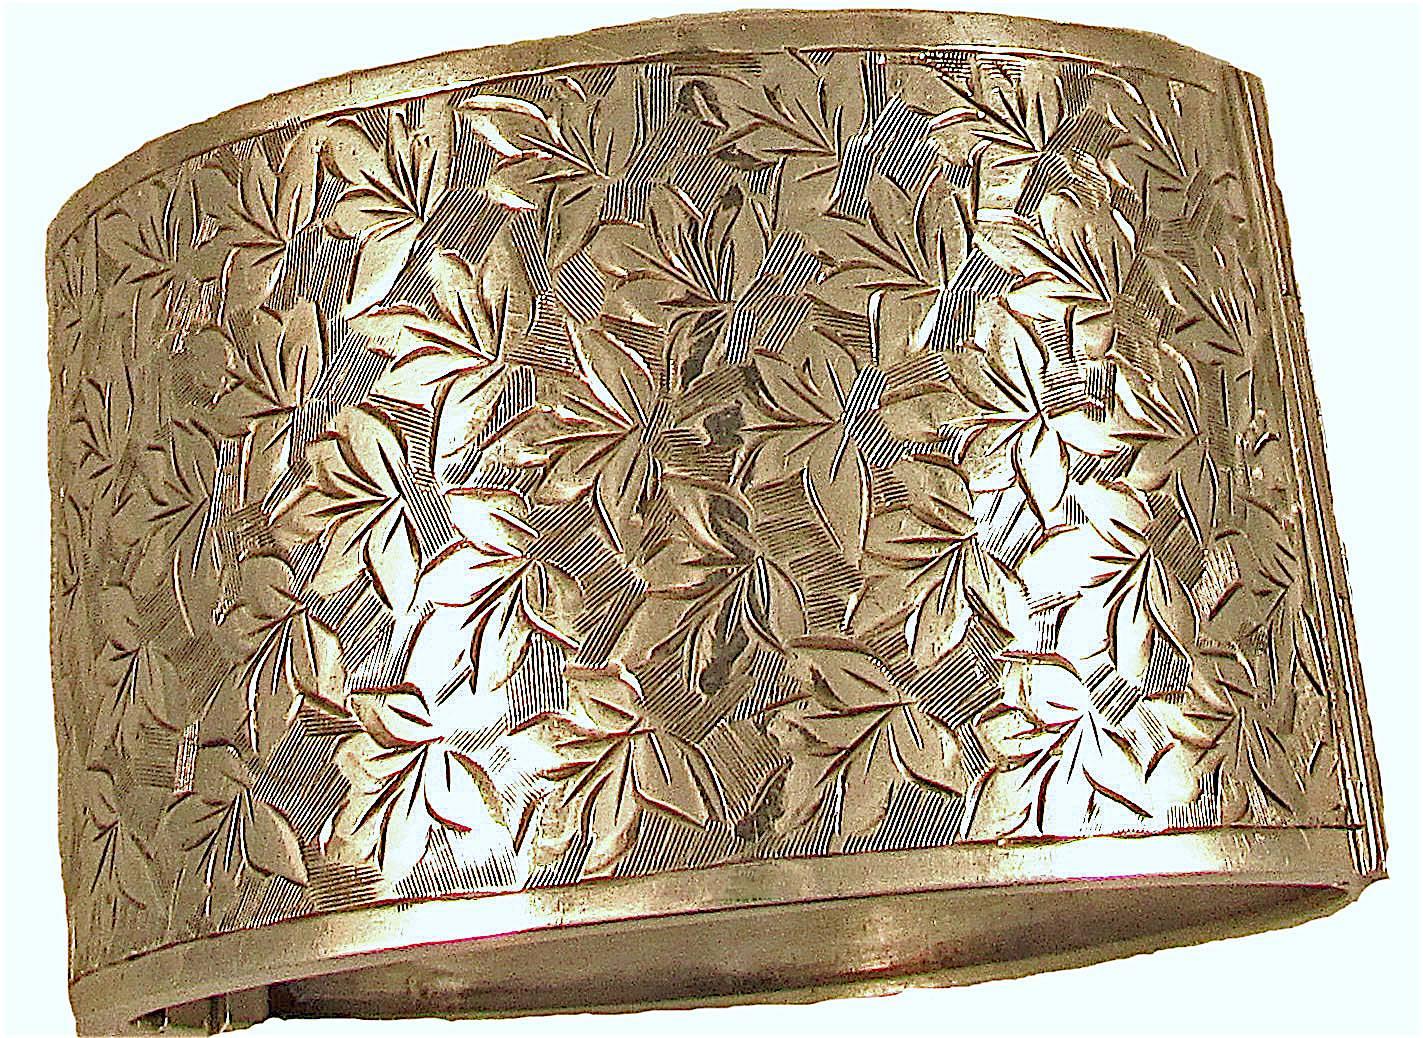 Stunning late Victorian style cuff bracelet with an overall hand engraved ivy motif. Wonderful to wear alone or with other bracelets. The bracelet is engraved inside Birmingham 1913 and measures 1 1/2